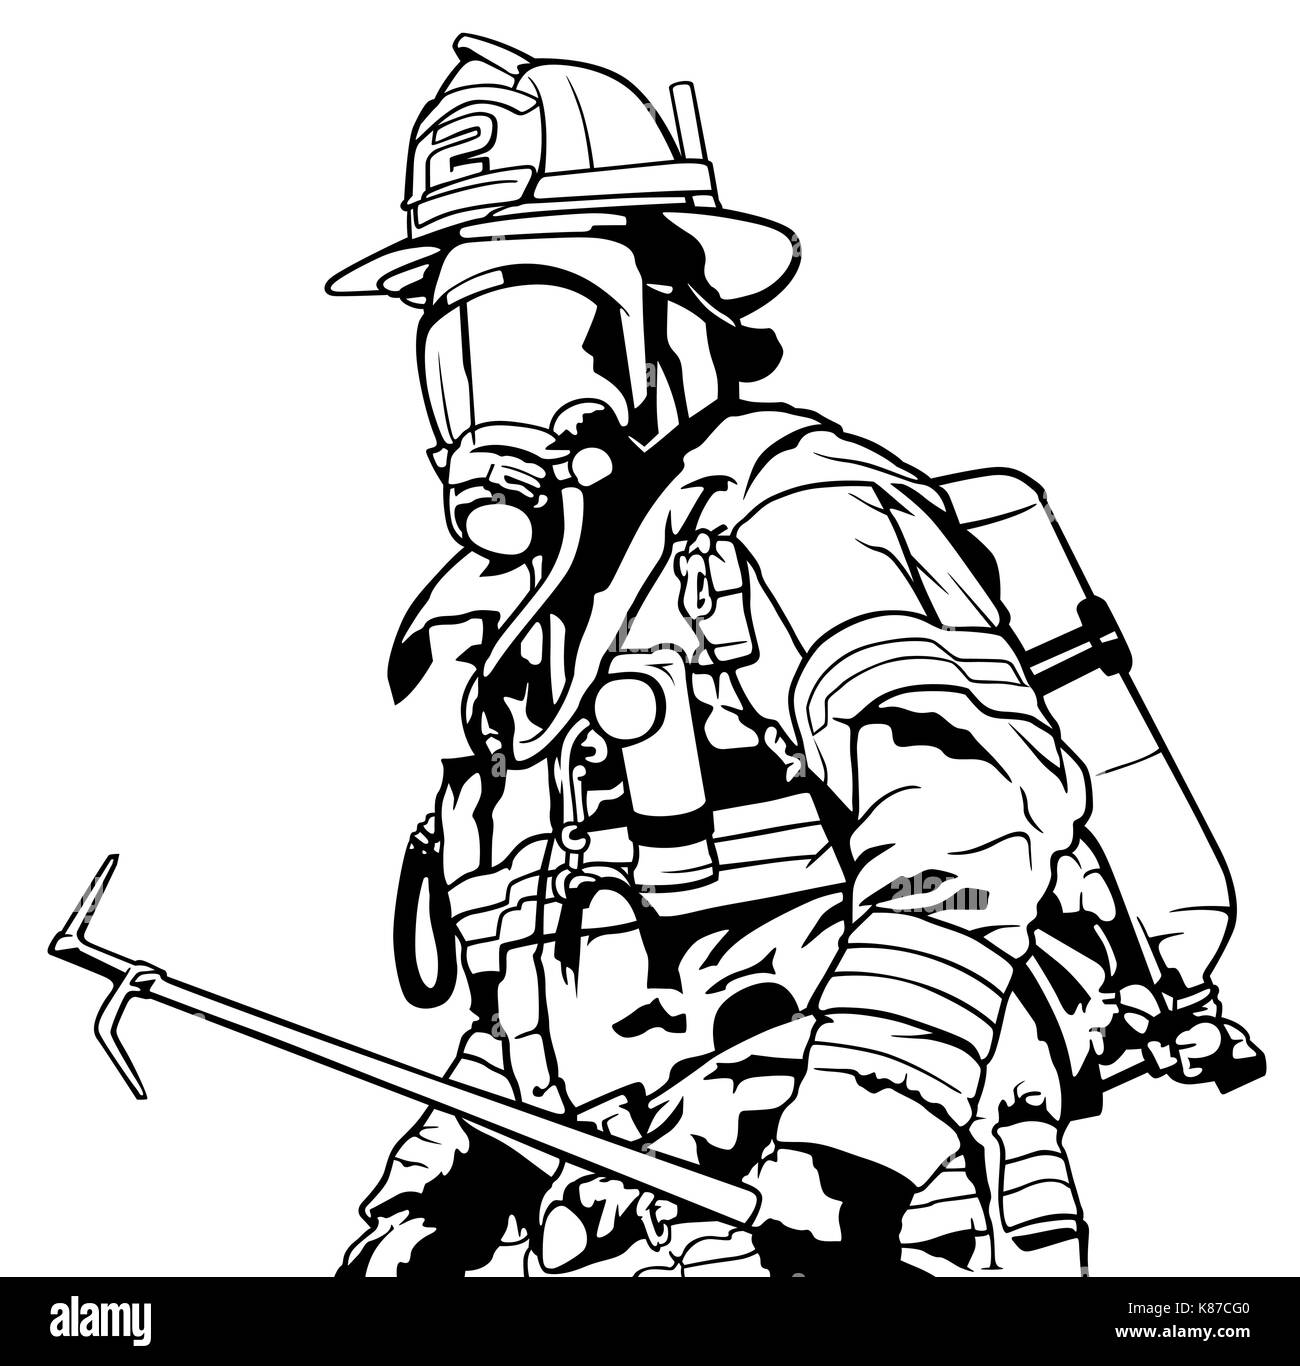 Cartoon Drawing Of Fire Man Suit Sketch with simple drawing